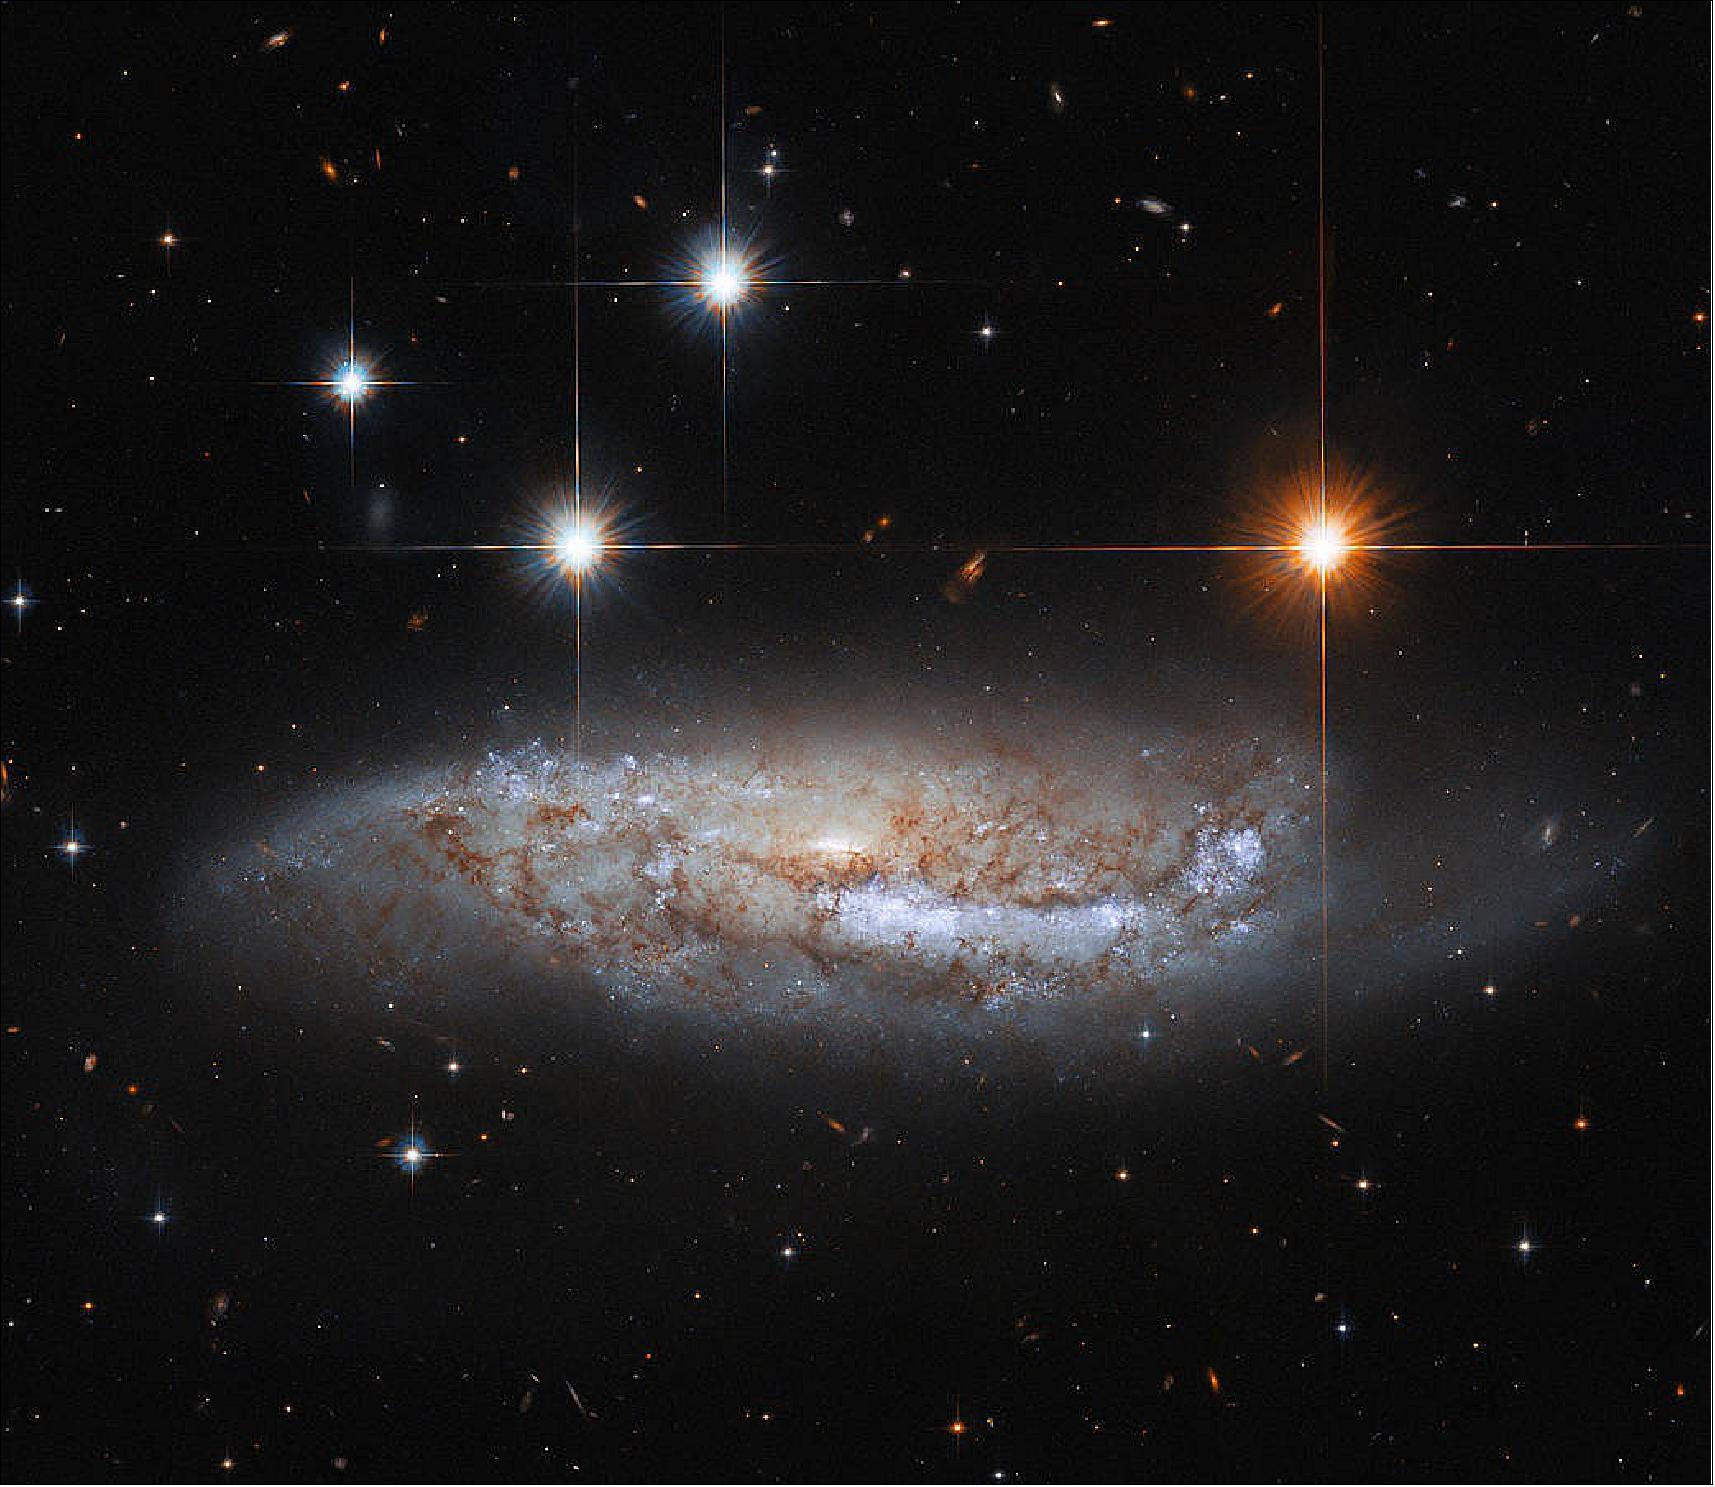 Figure 86: In this image, the NASA/ESA Hubble Space Telescope captures a side-on view of NGC 3568, a barred spiral galaxy roughly 57 million light-years from the Milky Way in the constellation Centaurus. In 2014 the light from a supernova explosion in NGC 3568 reached Earth – a sudden flare of light caused by the titanic explosion accompanying the death of a massive star. While most astronomical discoveries are the work of teams of professional astronomers, this supernova was discovered by amateur astronomers who are part of the Backyard Observatory Supernova Search in New Zealand. Dedicated amateur astronomers often make intriguing discoveries – particularly of fleeting astronomical phenomena such as supernovae and comets (image credit: ESA/Hubble & NASA, M. Sun, text credit: ESA)